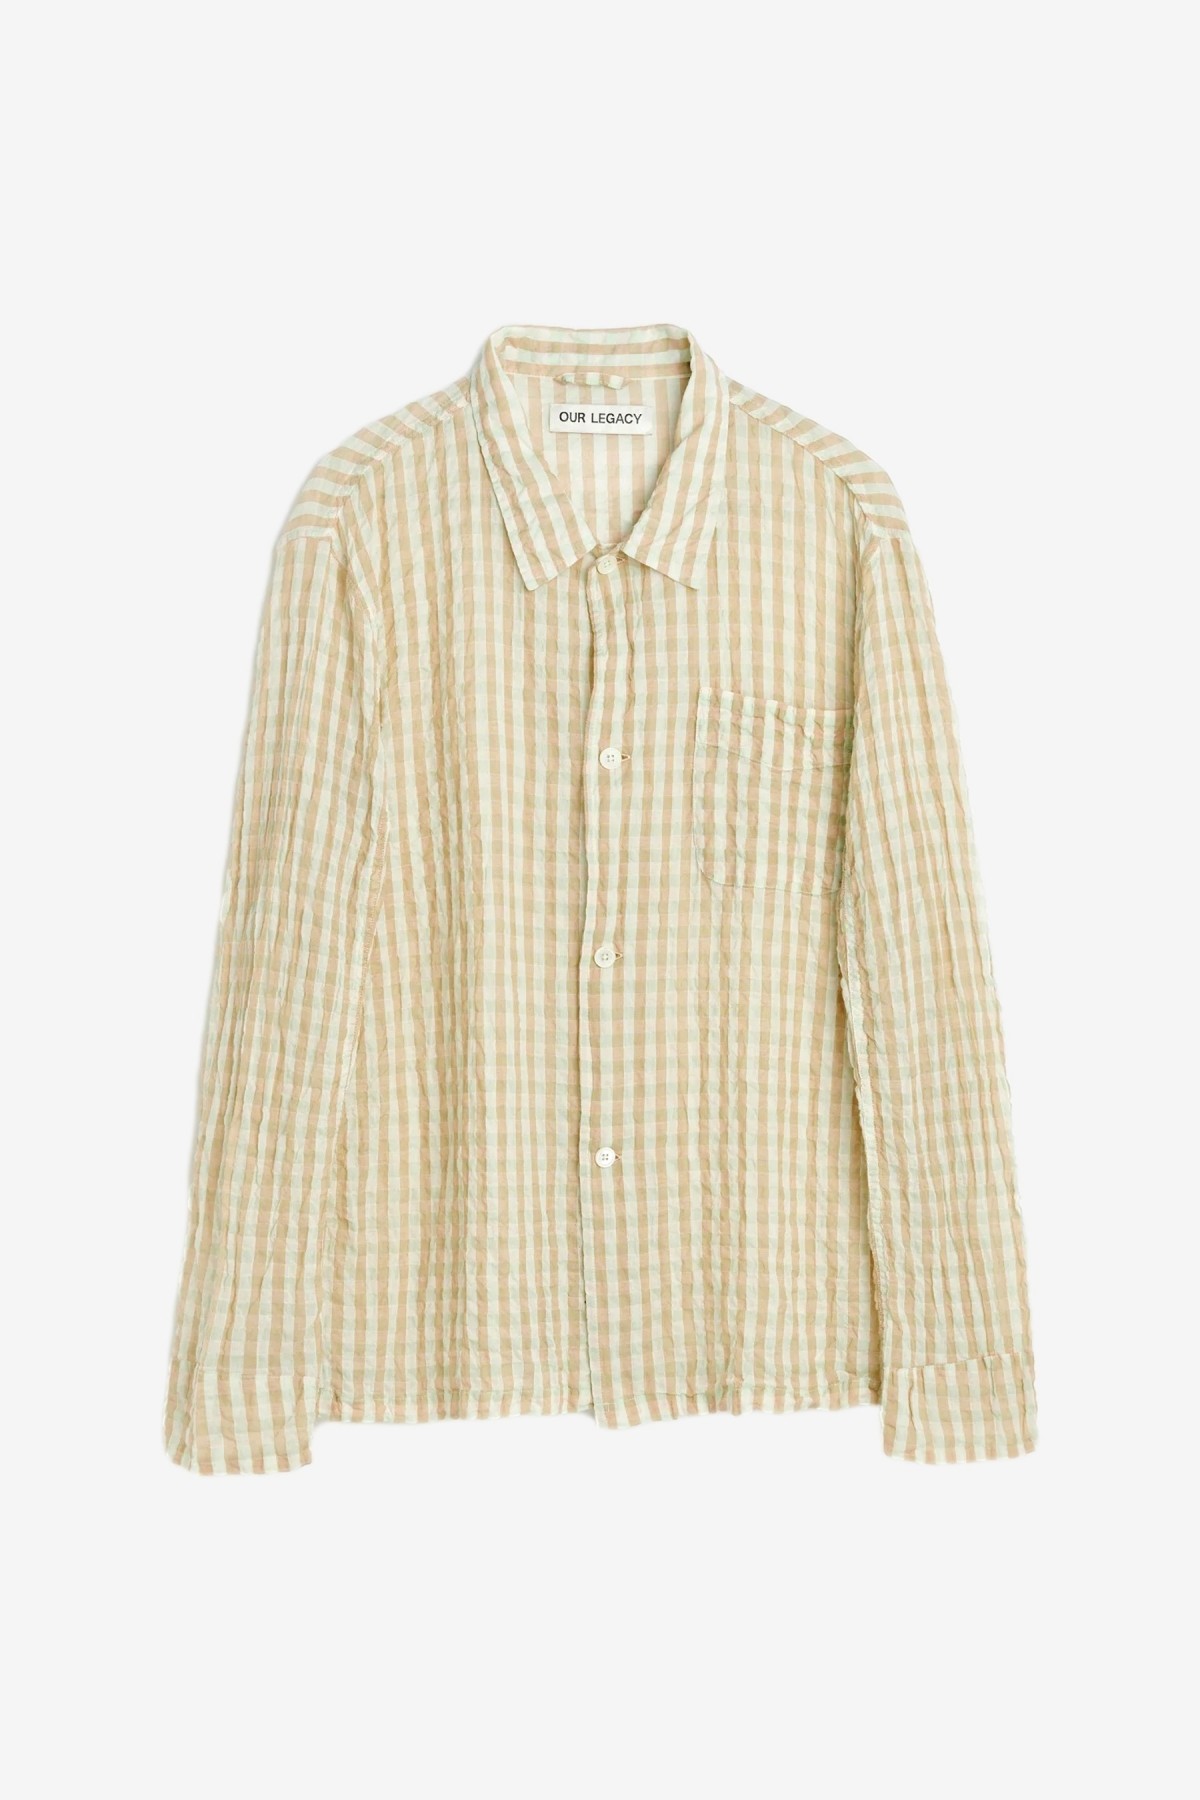 Our Legacy Box Shirt in Basque Seersucker Check